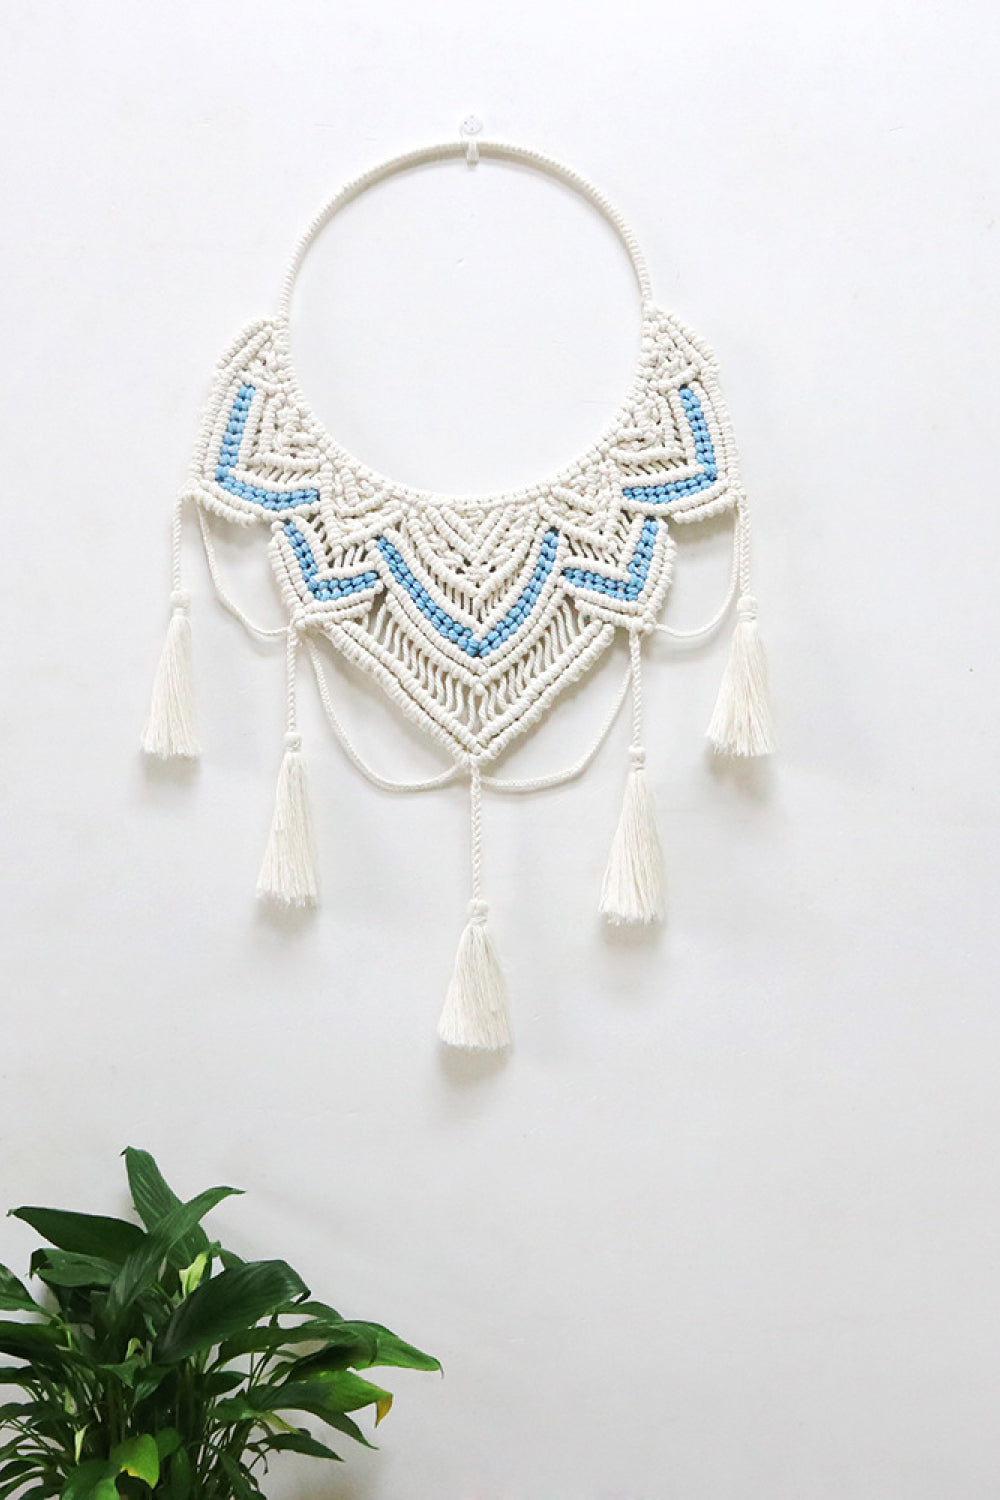 Macrame Wall Hanging with Tassel